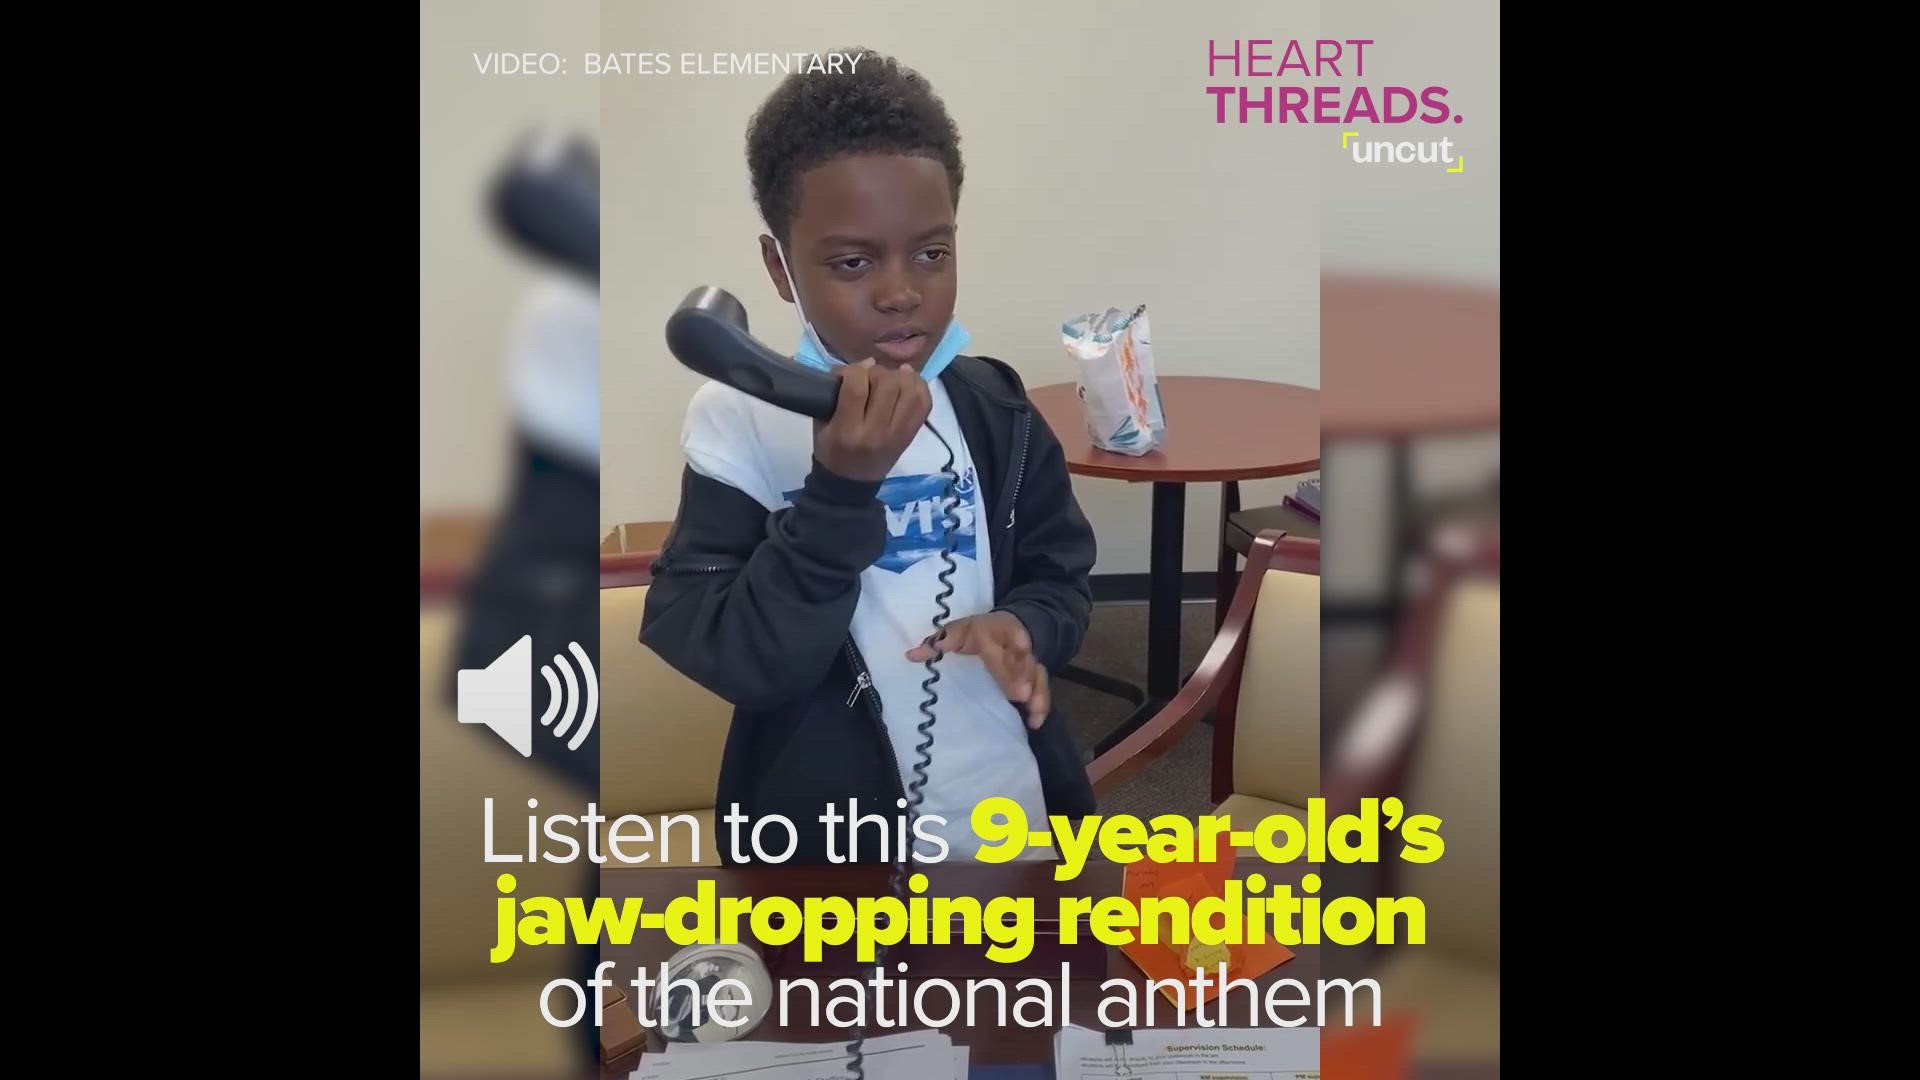 DCorey Johnson, 9, has been singing in his church's choir since he was 4 years old. He showcased his natural talent by singing the national anthem for his school.